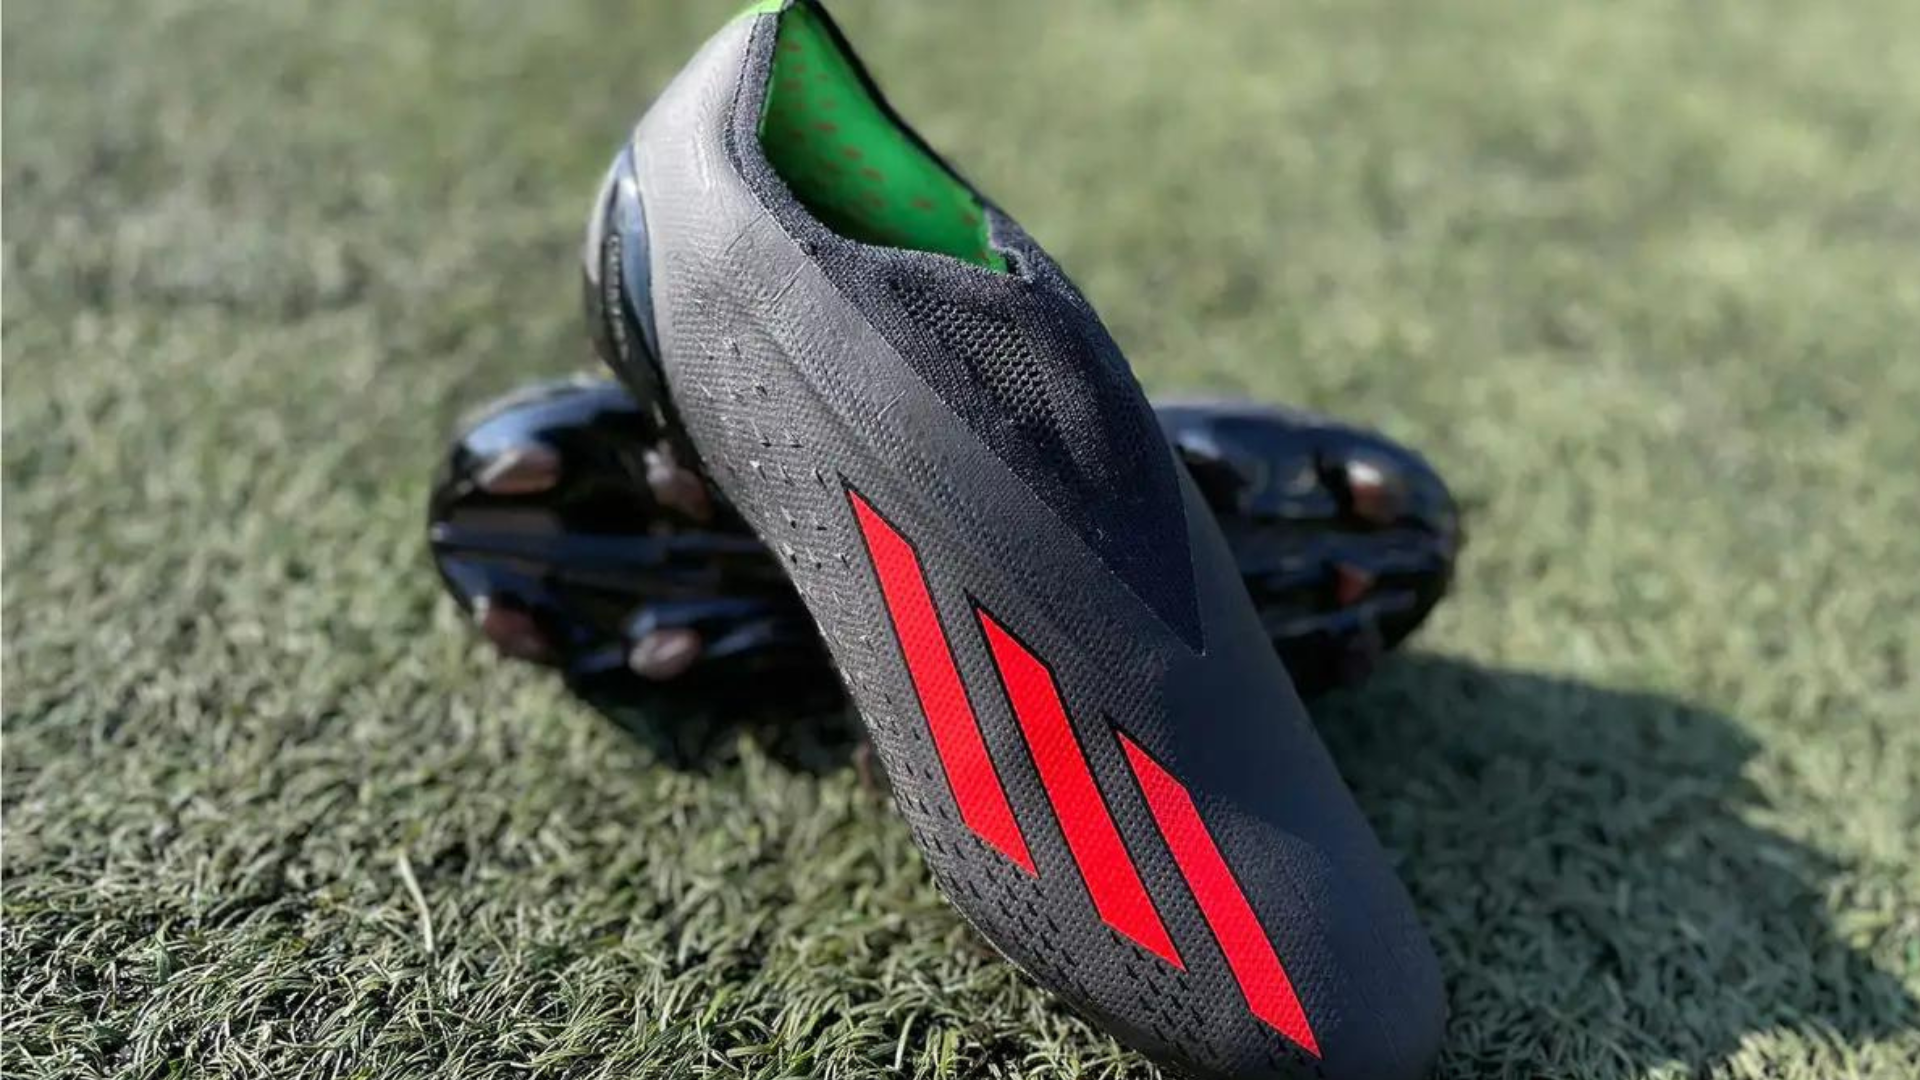 Best Nike Football Boots for Soccer Players